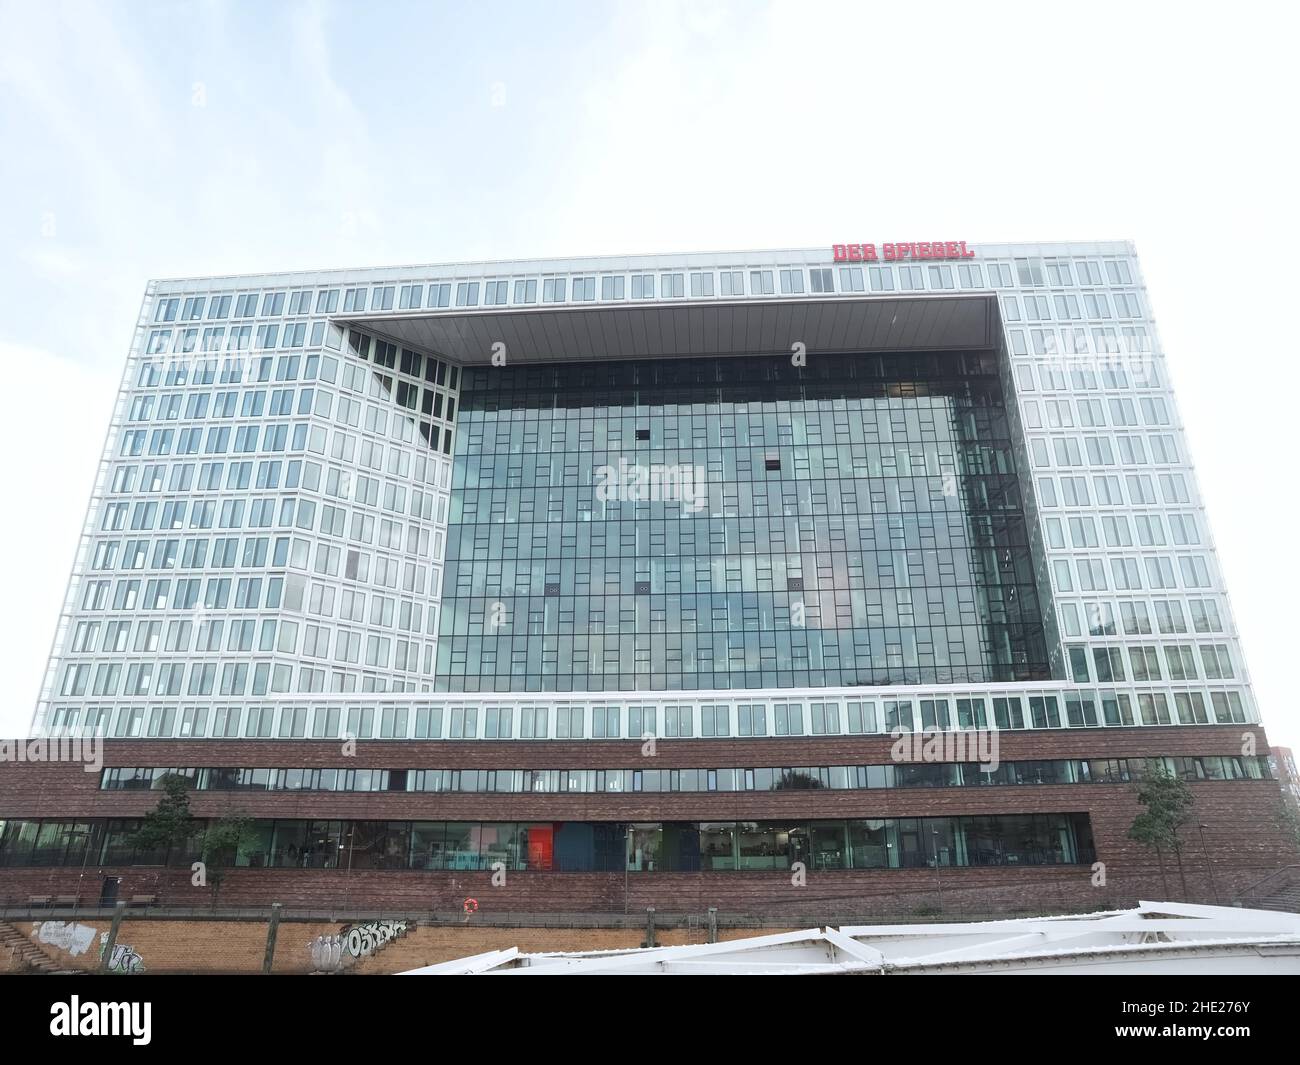 Daily News Building High Resolution Stock Photography and Images - Alamy